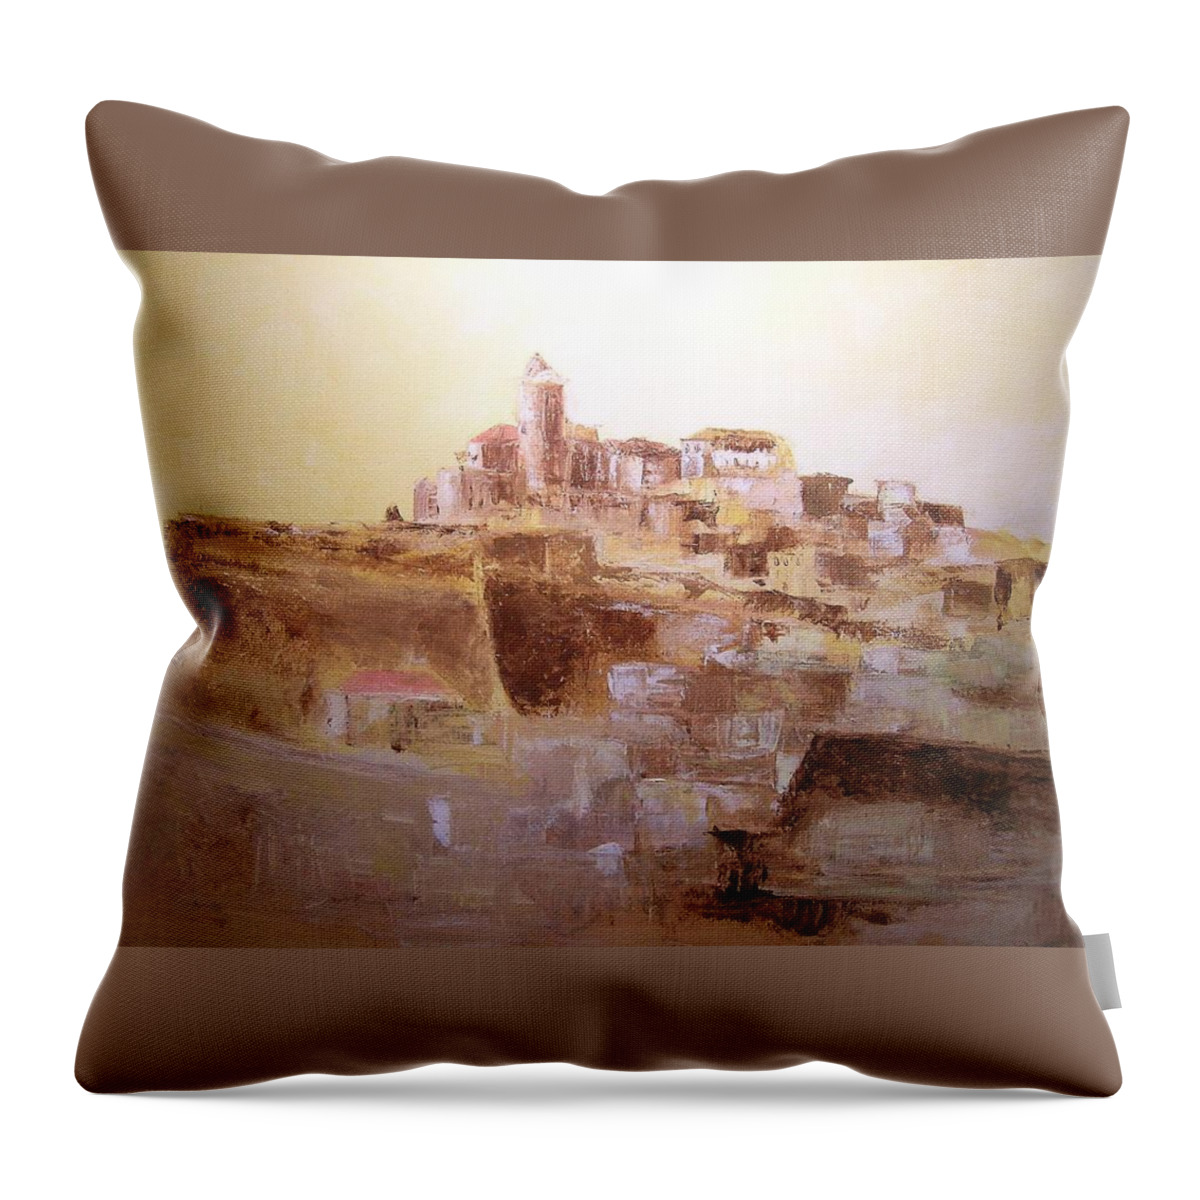 Original Cityscpae Throw Pillow featuring the painting D Alt Vila Ibiza Old Town by Lizzy Forrester